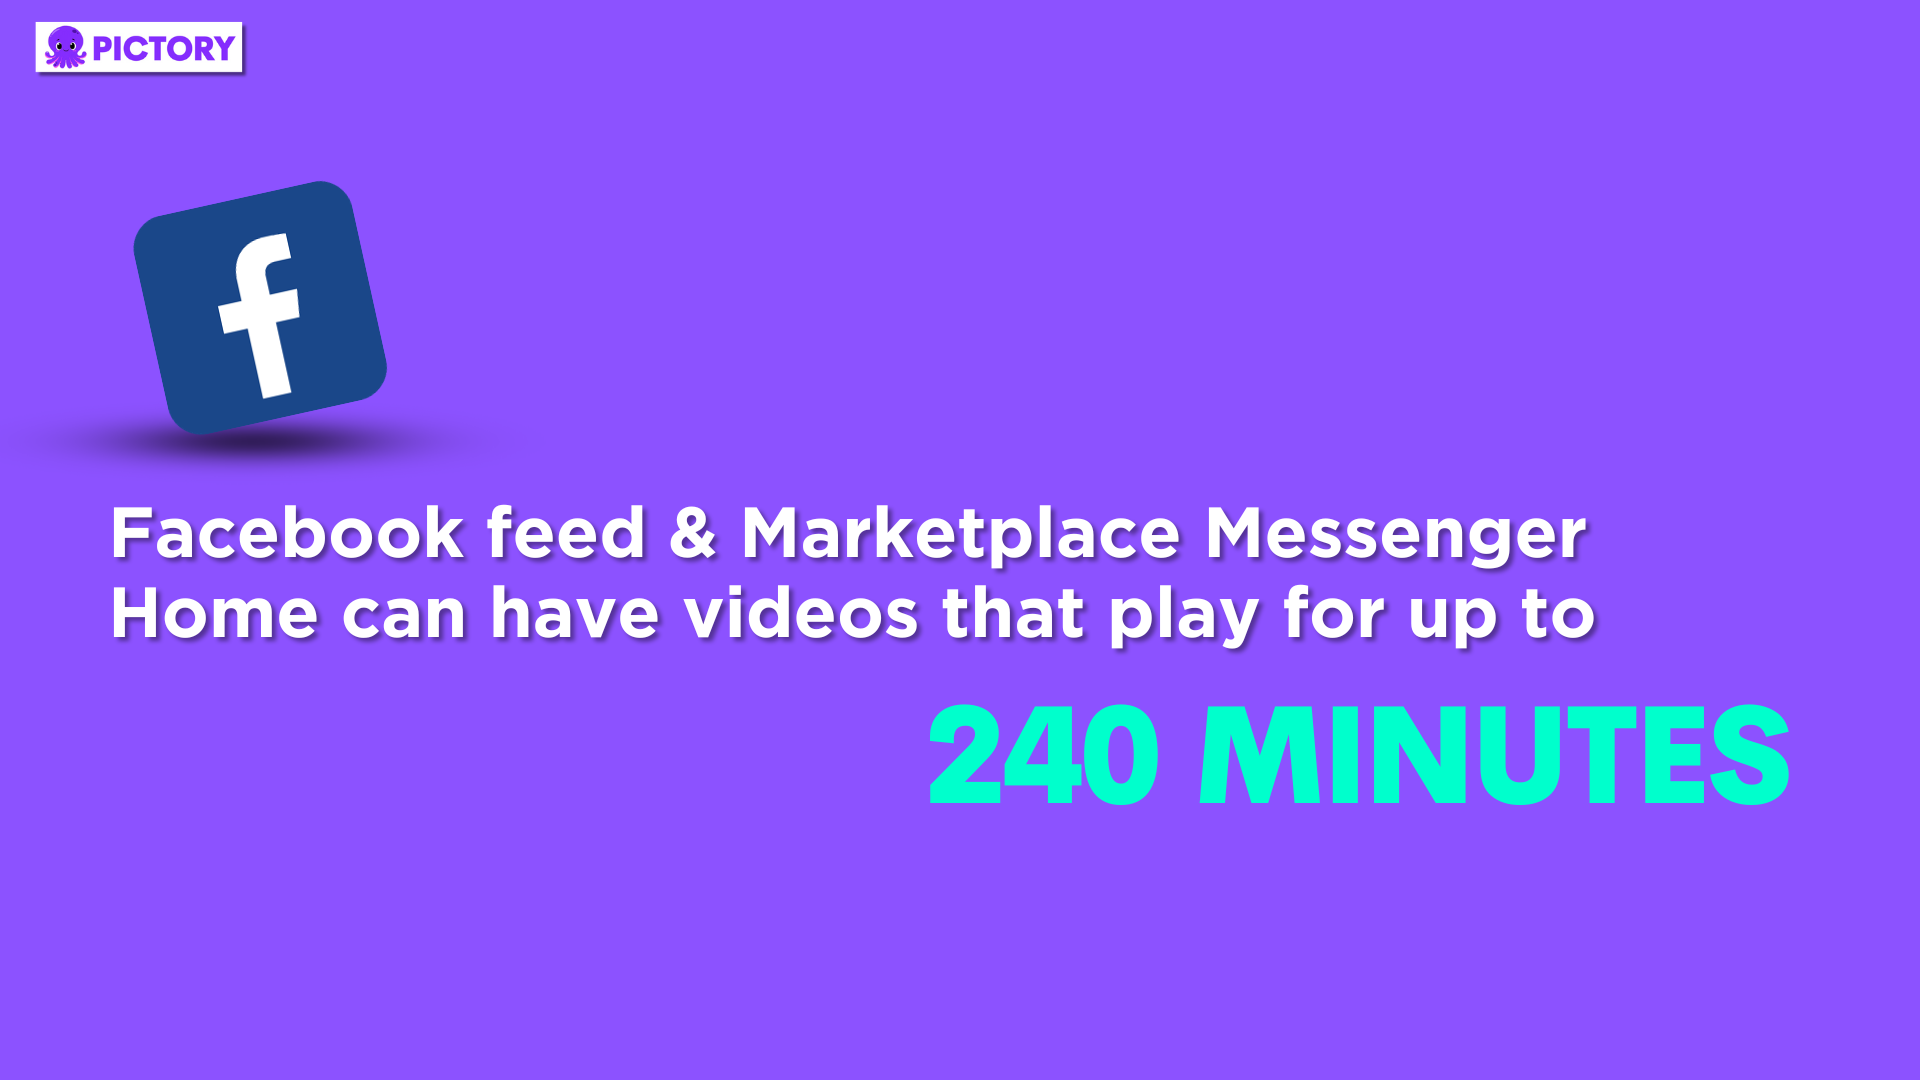 Facebook statistic, infographic, Facebook feed & Marketplace Messenger Home can have videos that play for up to 240 minutes.